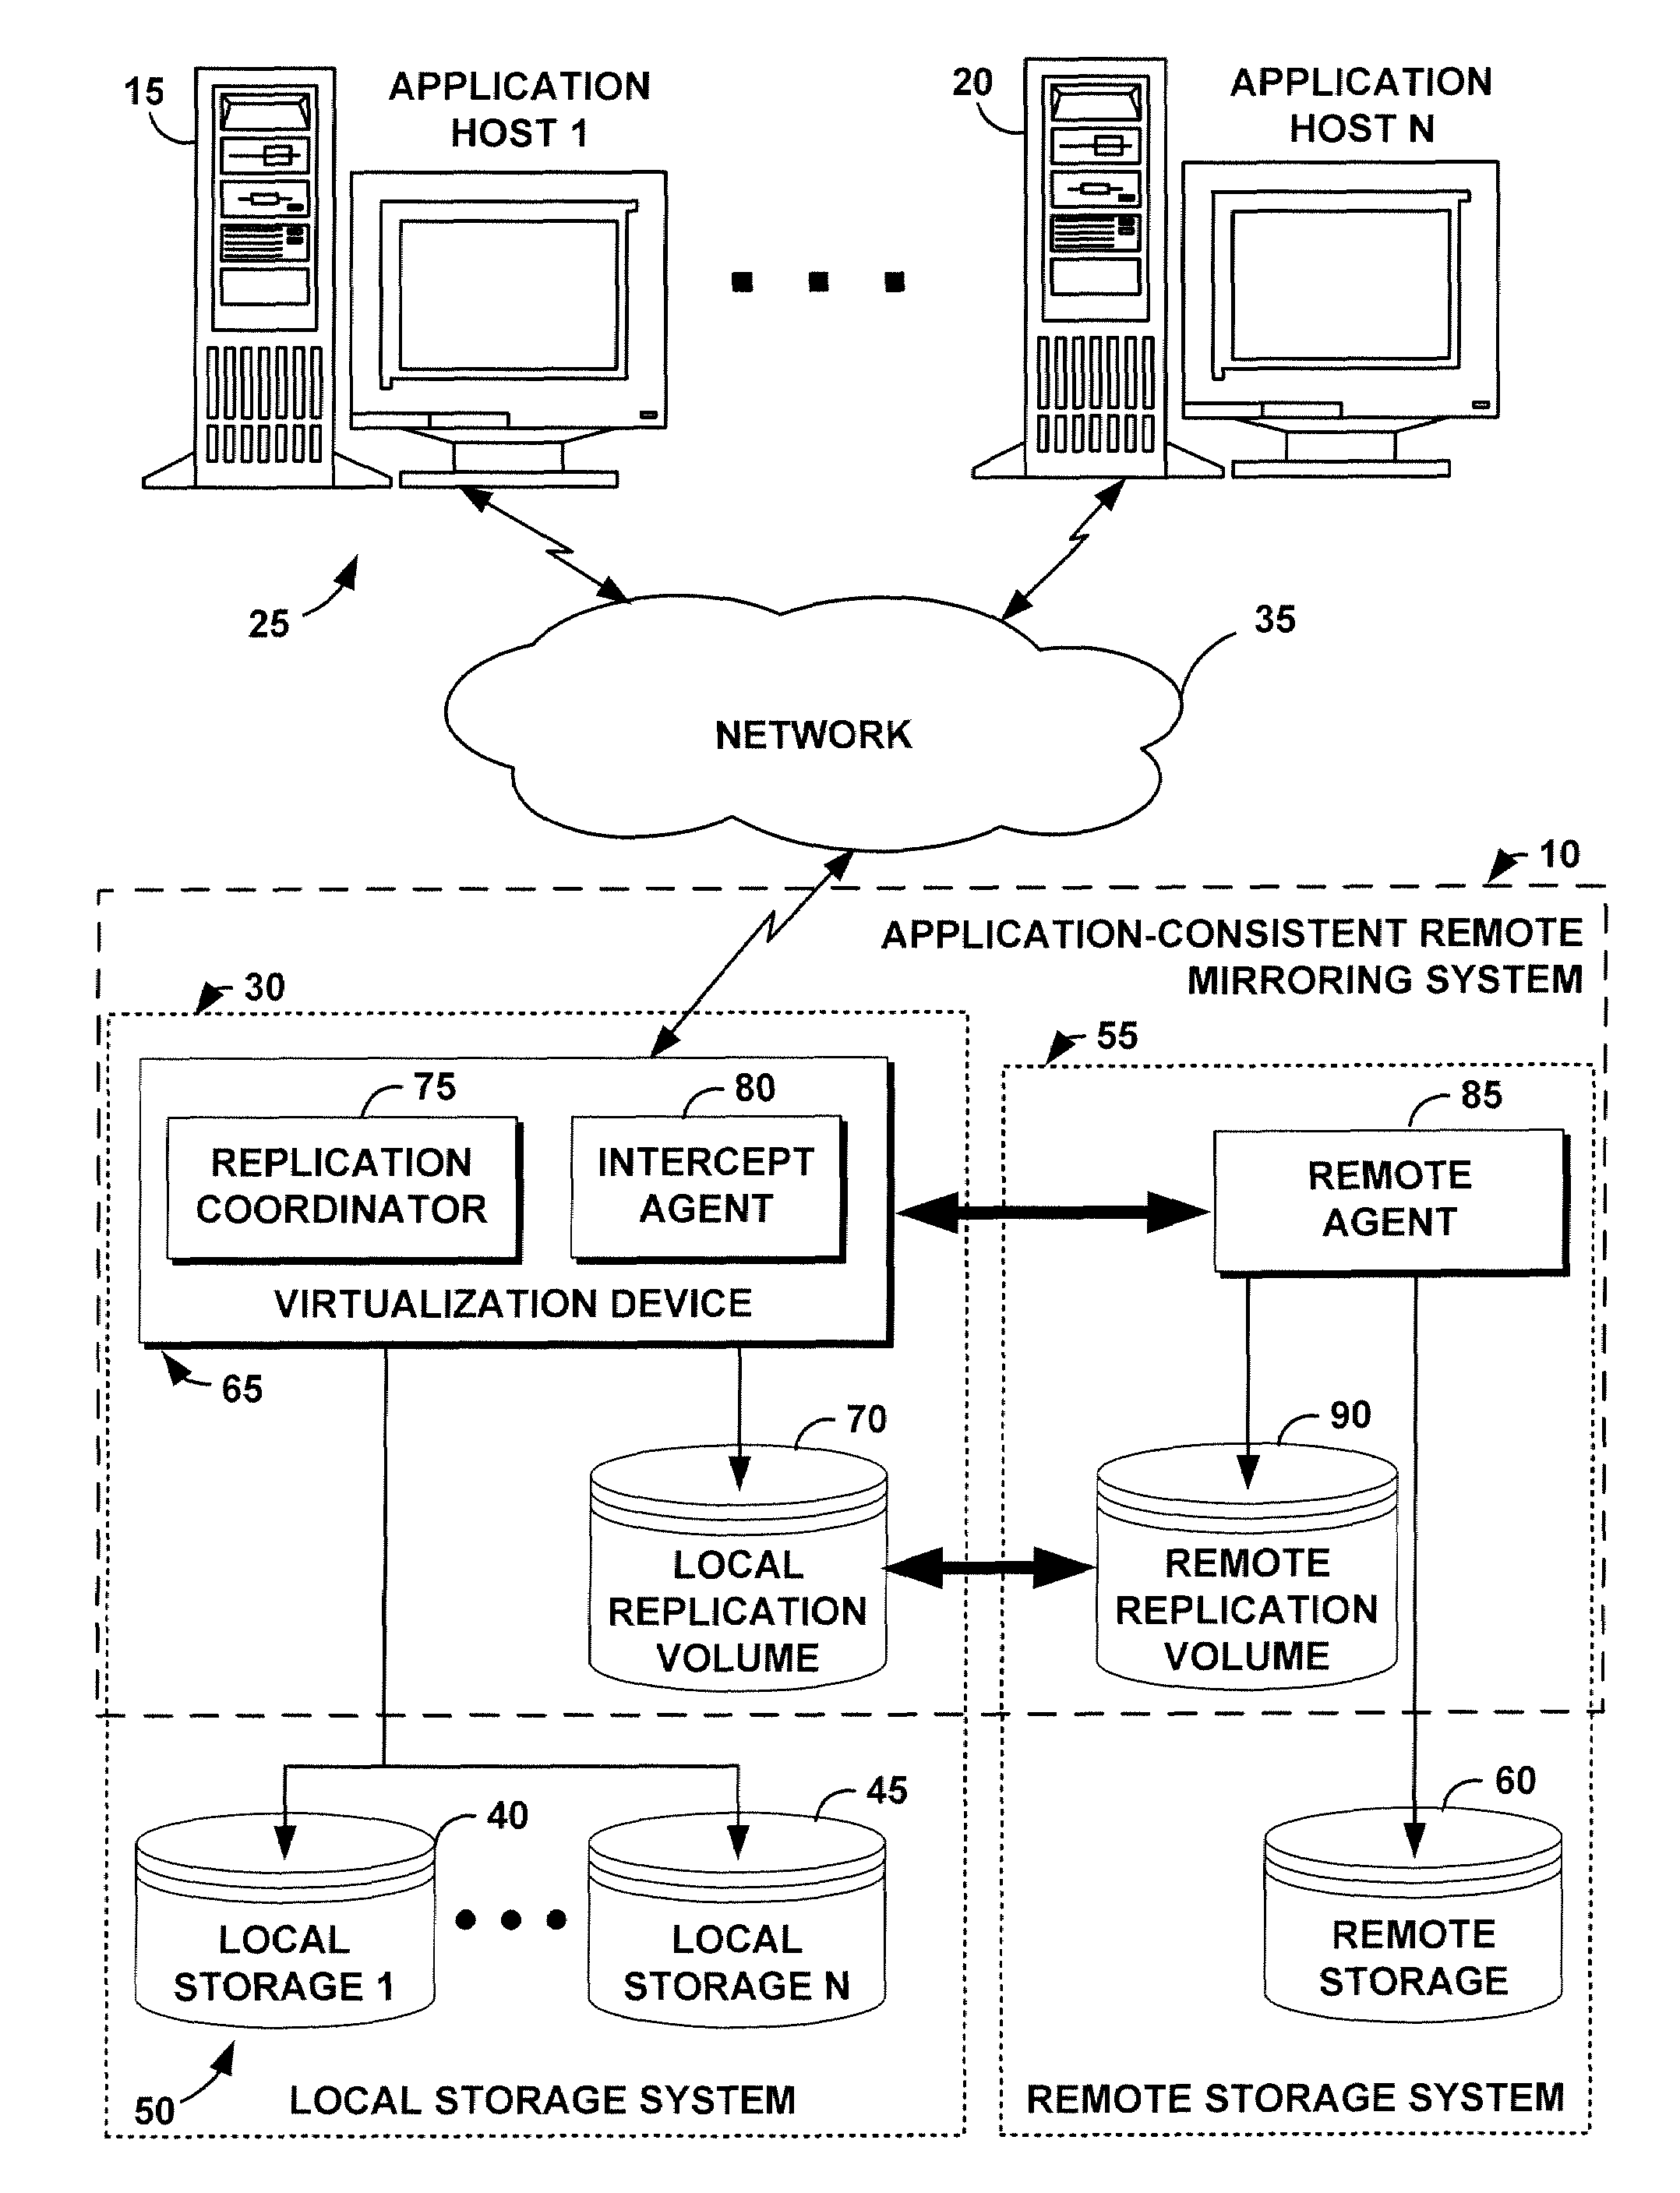 Method for creating an application-consistent remote copy of data using remote mirroring